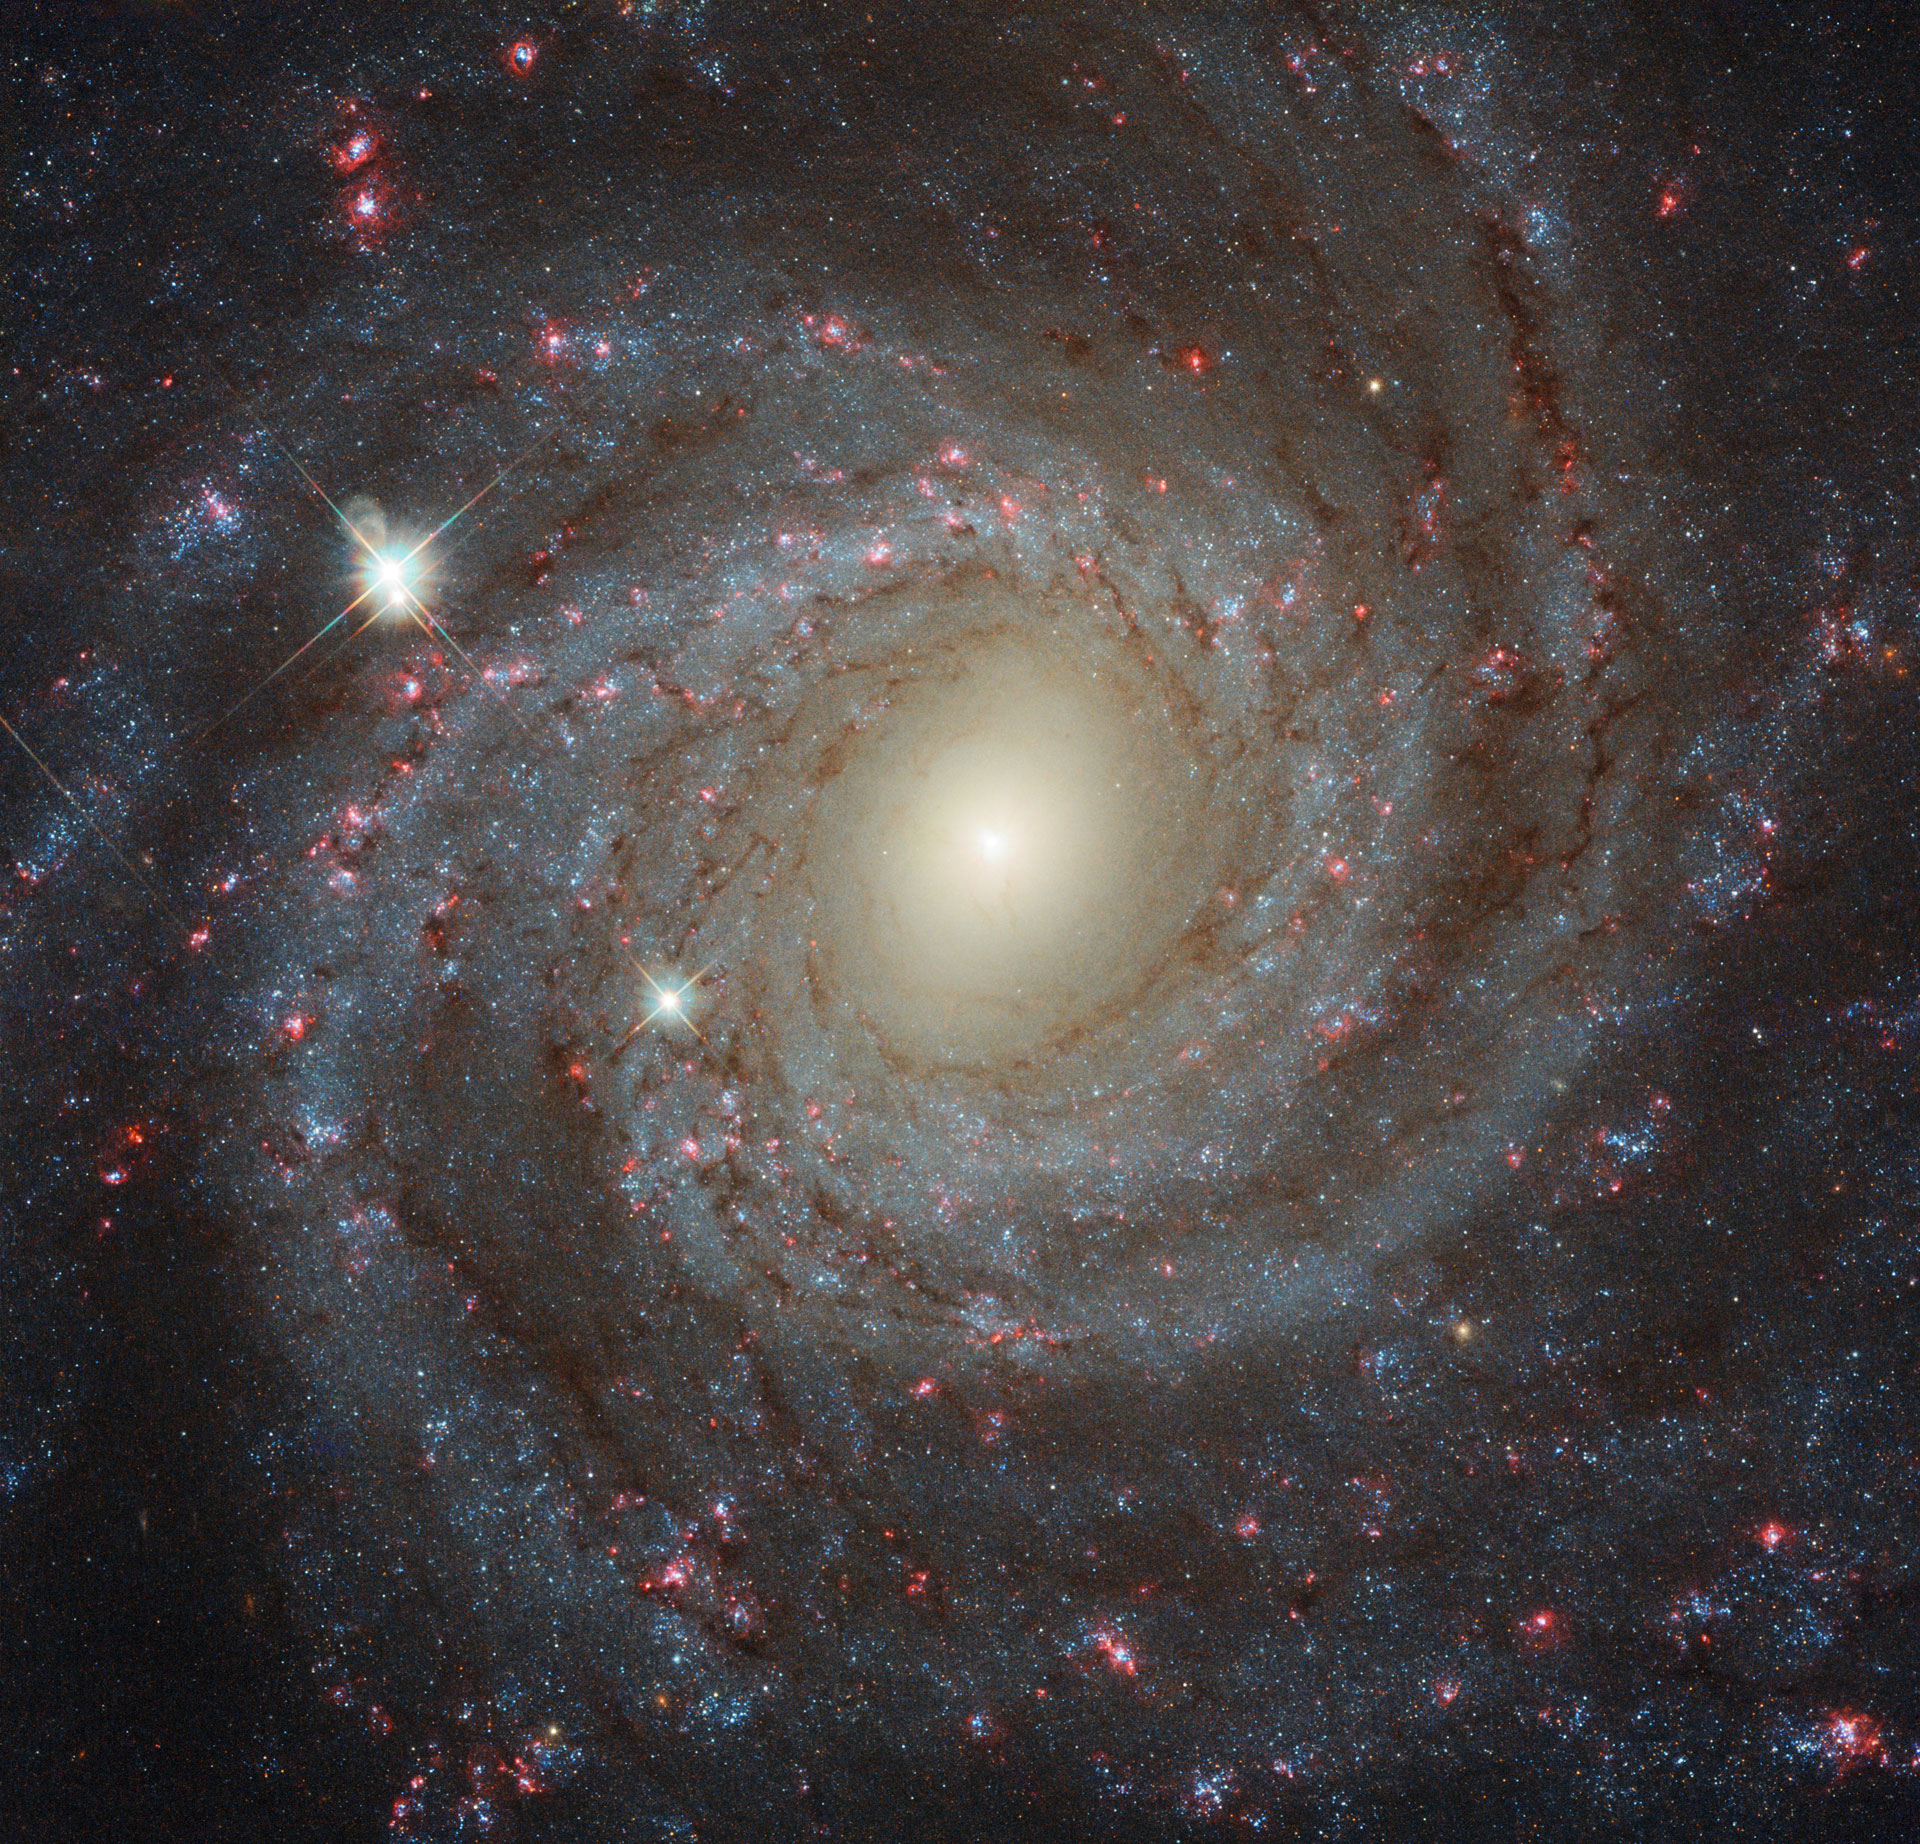 Newly Released Hubble Image of Spiral Galaxy NGC 3344